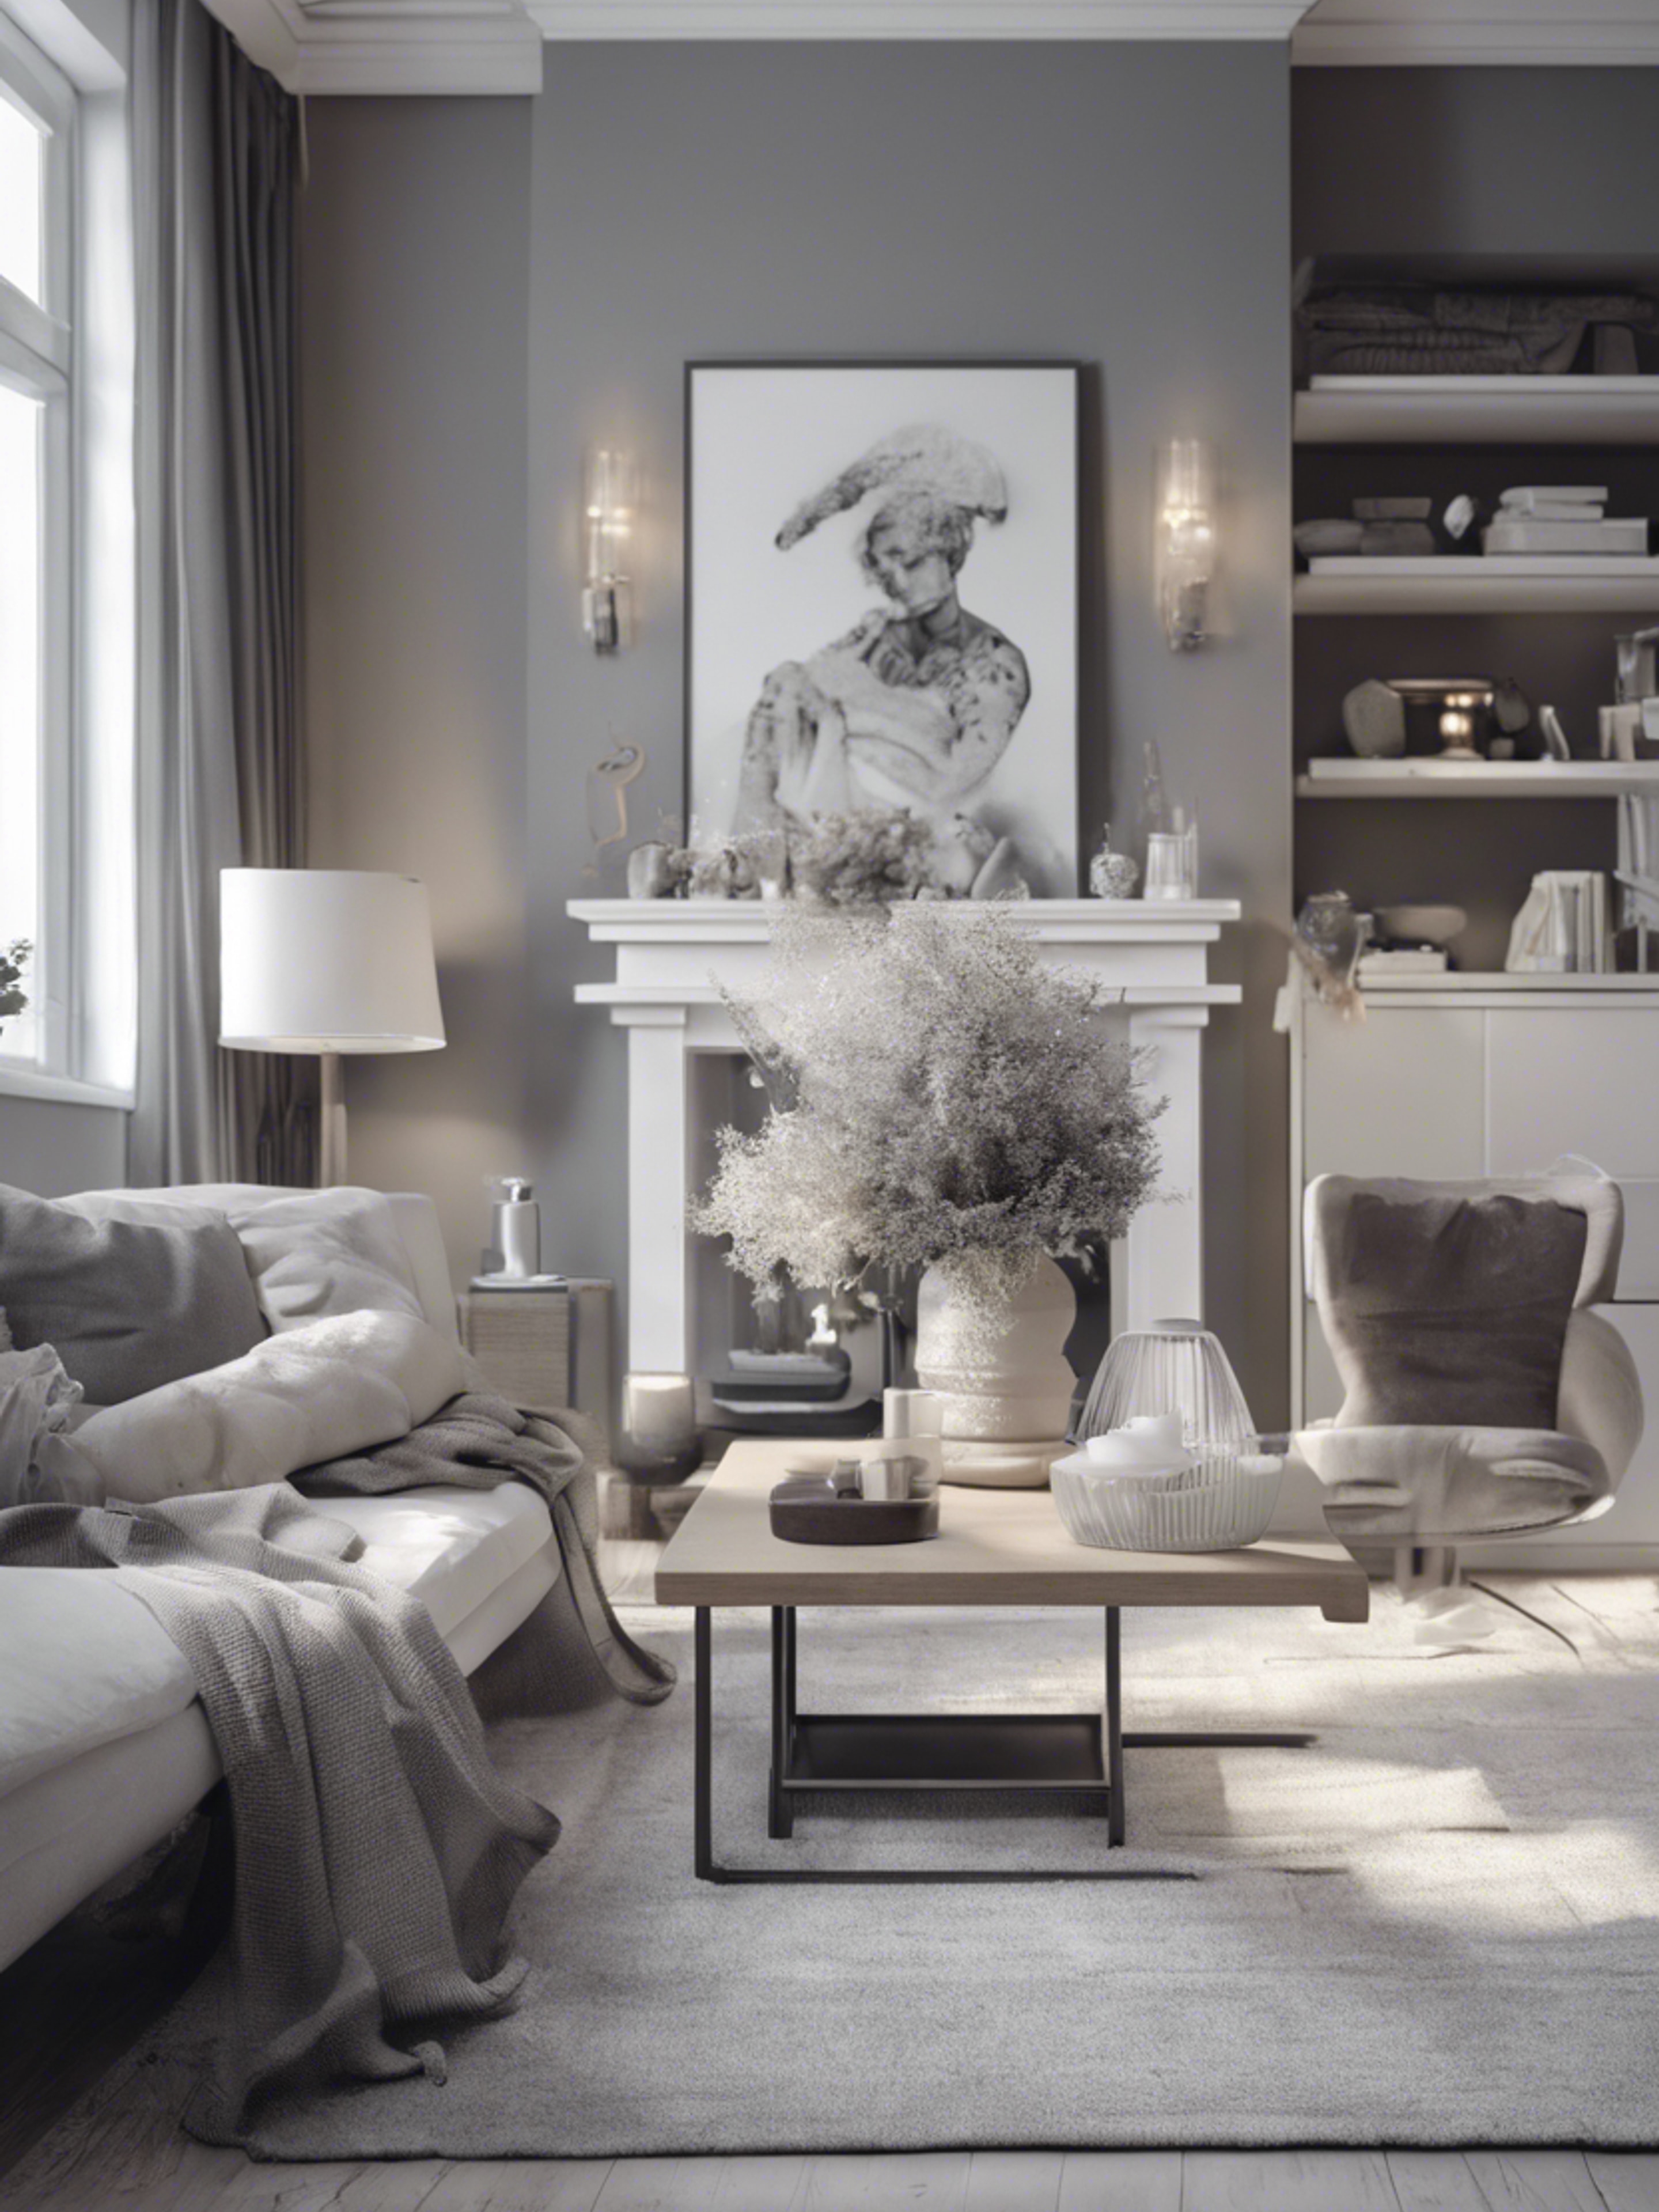 A classic interior design of a living room in neutral gray and white tones. Hintergrund[b4f6eac2faba4219b360]